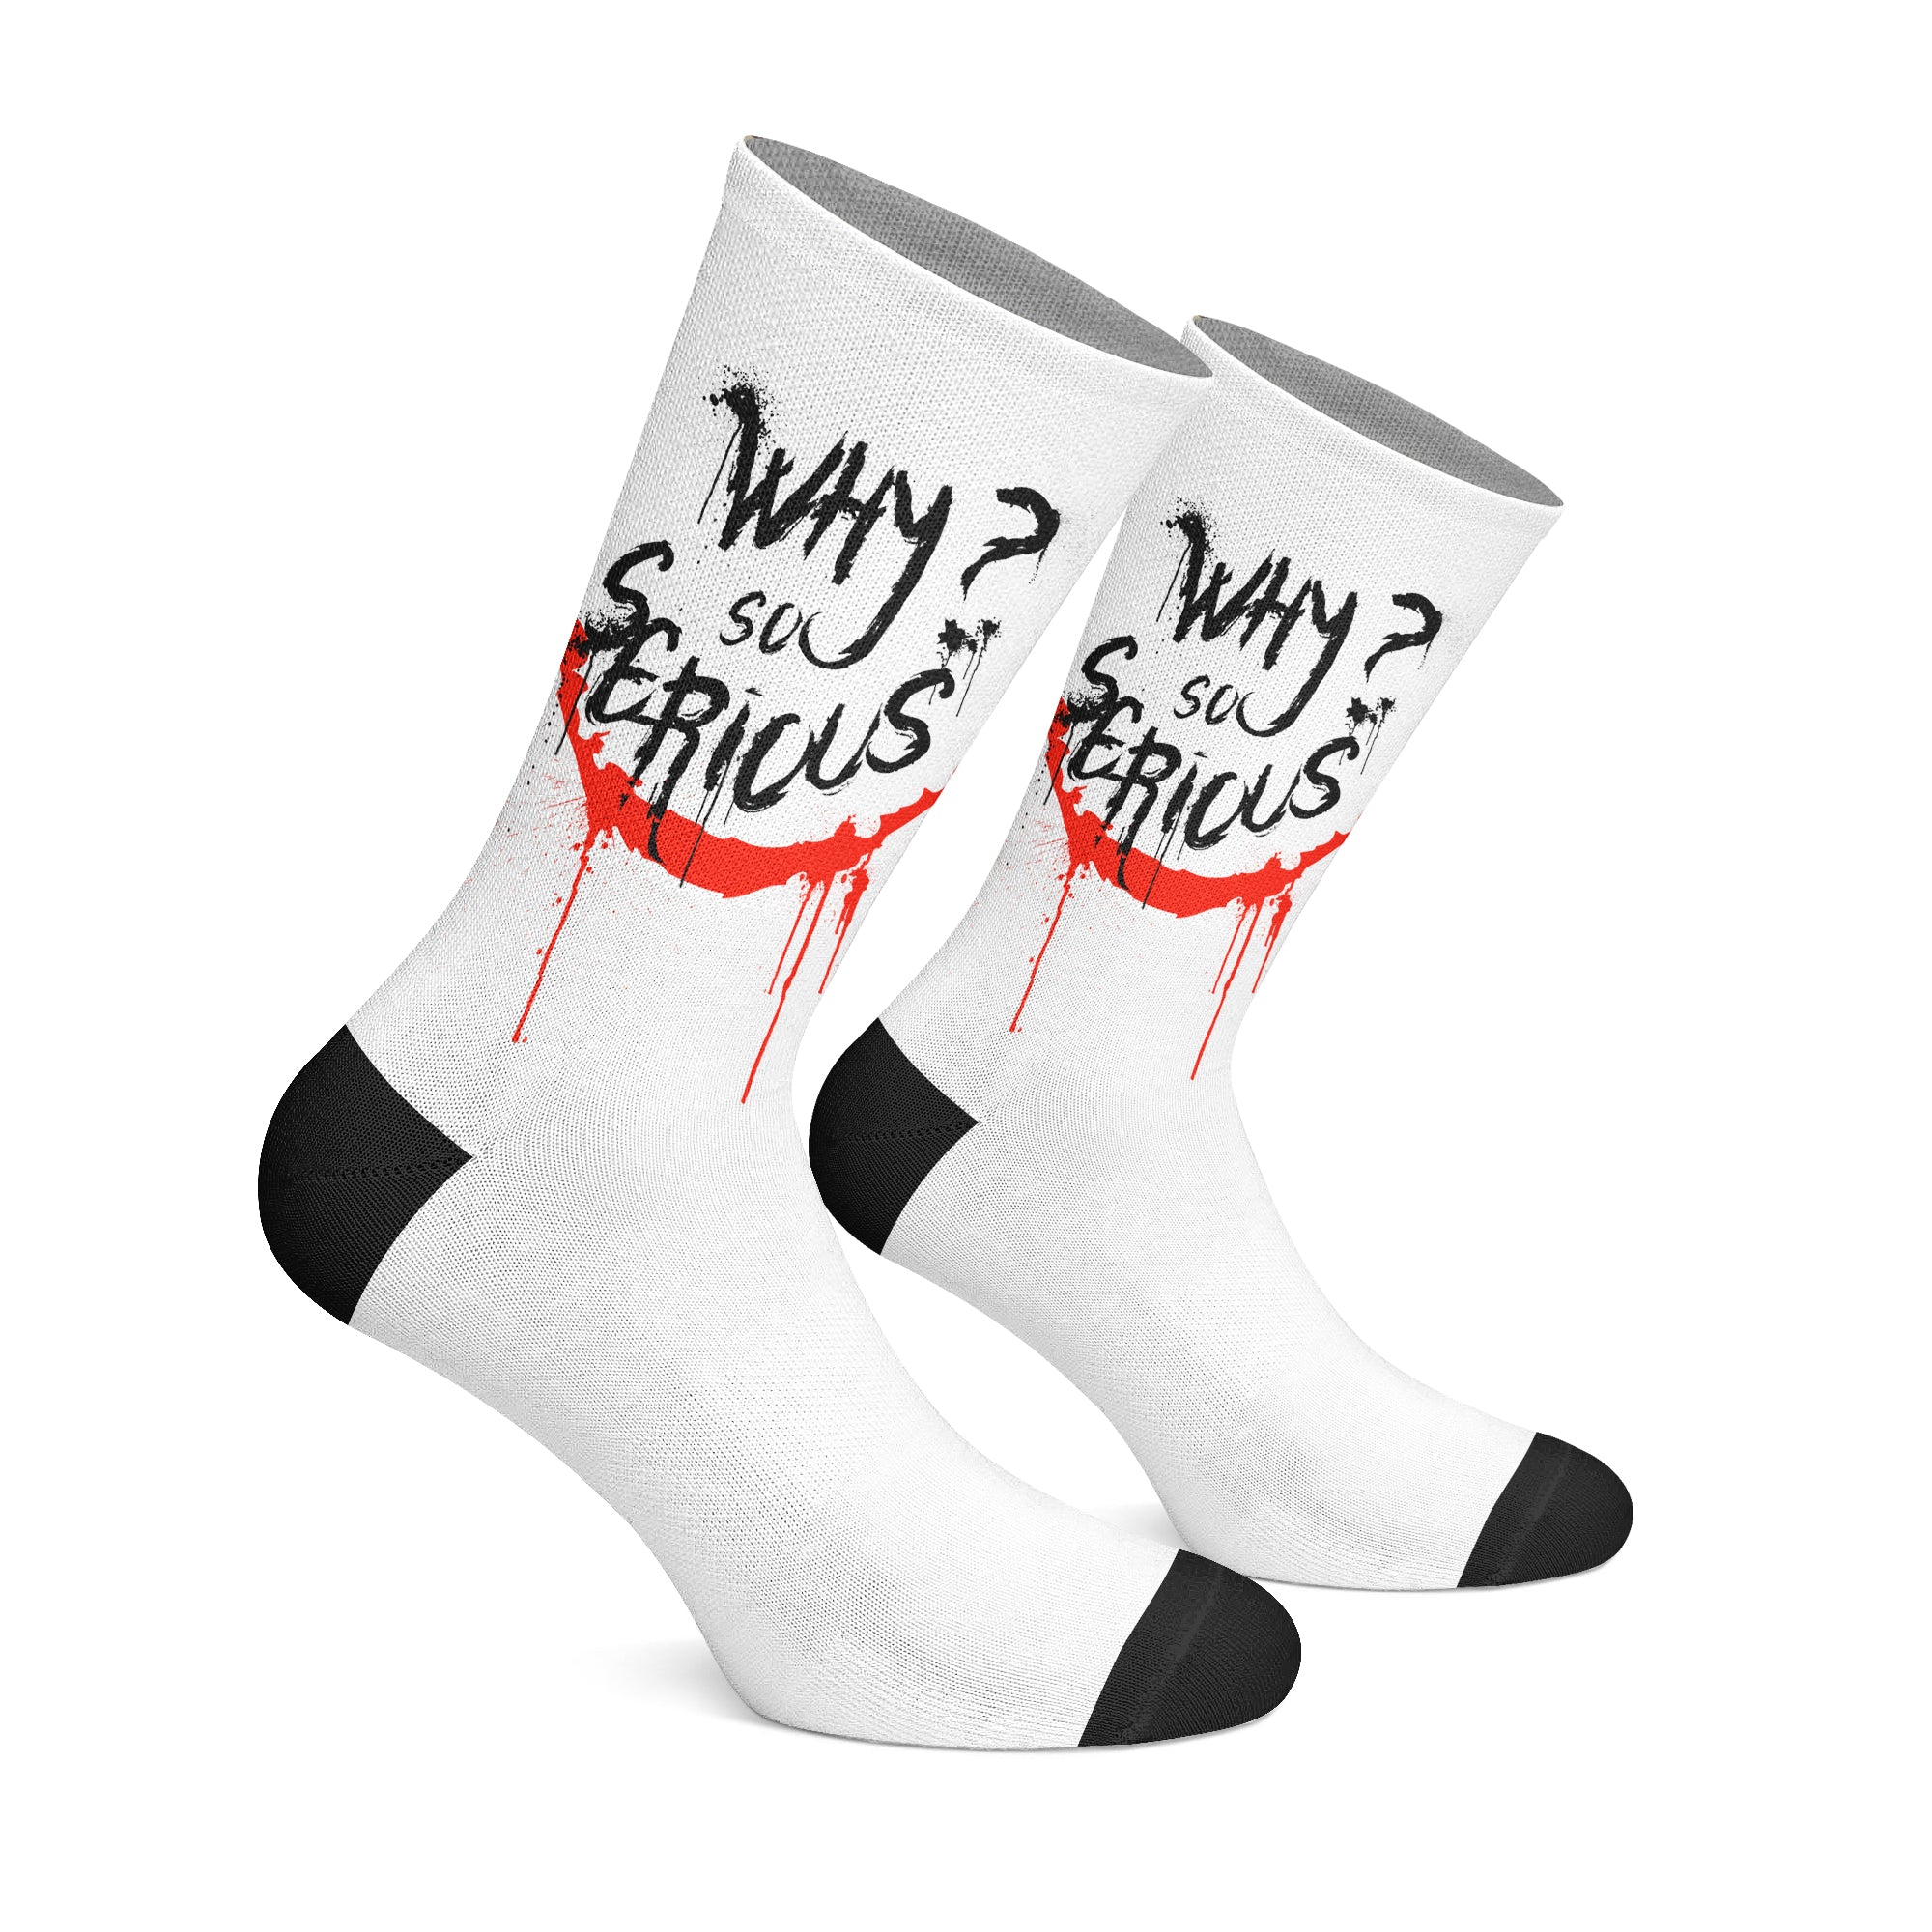 Why So Serious - Socks